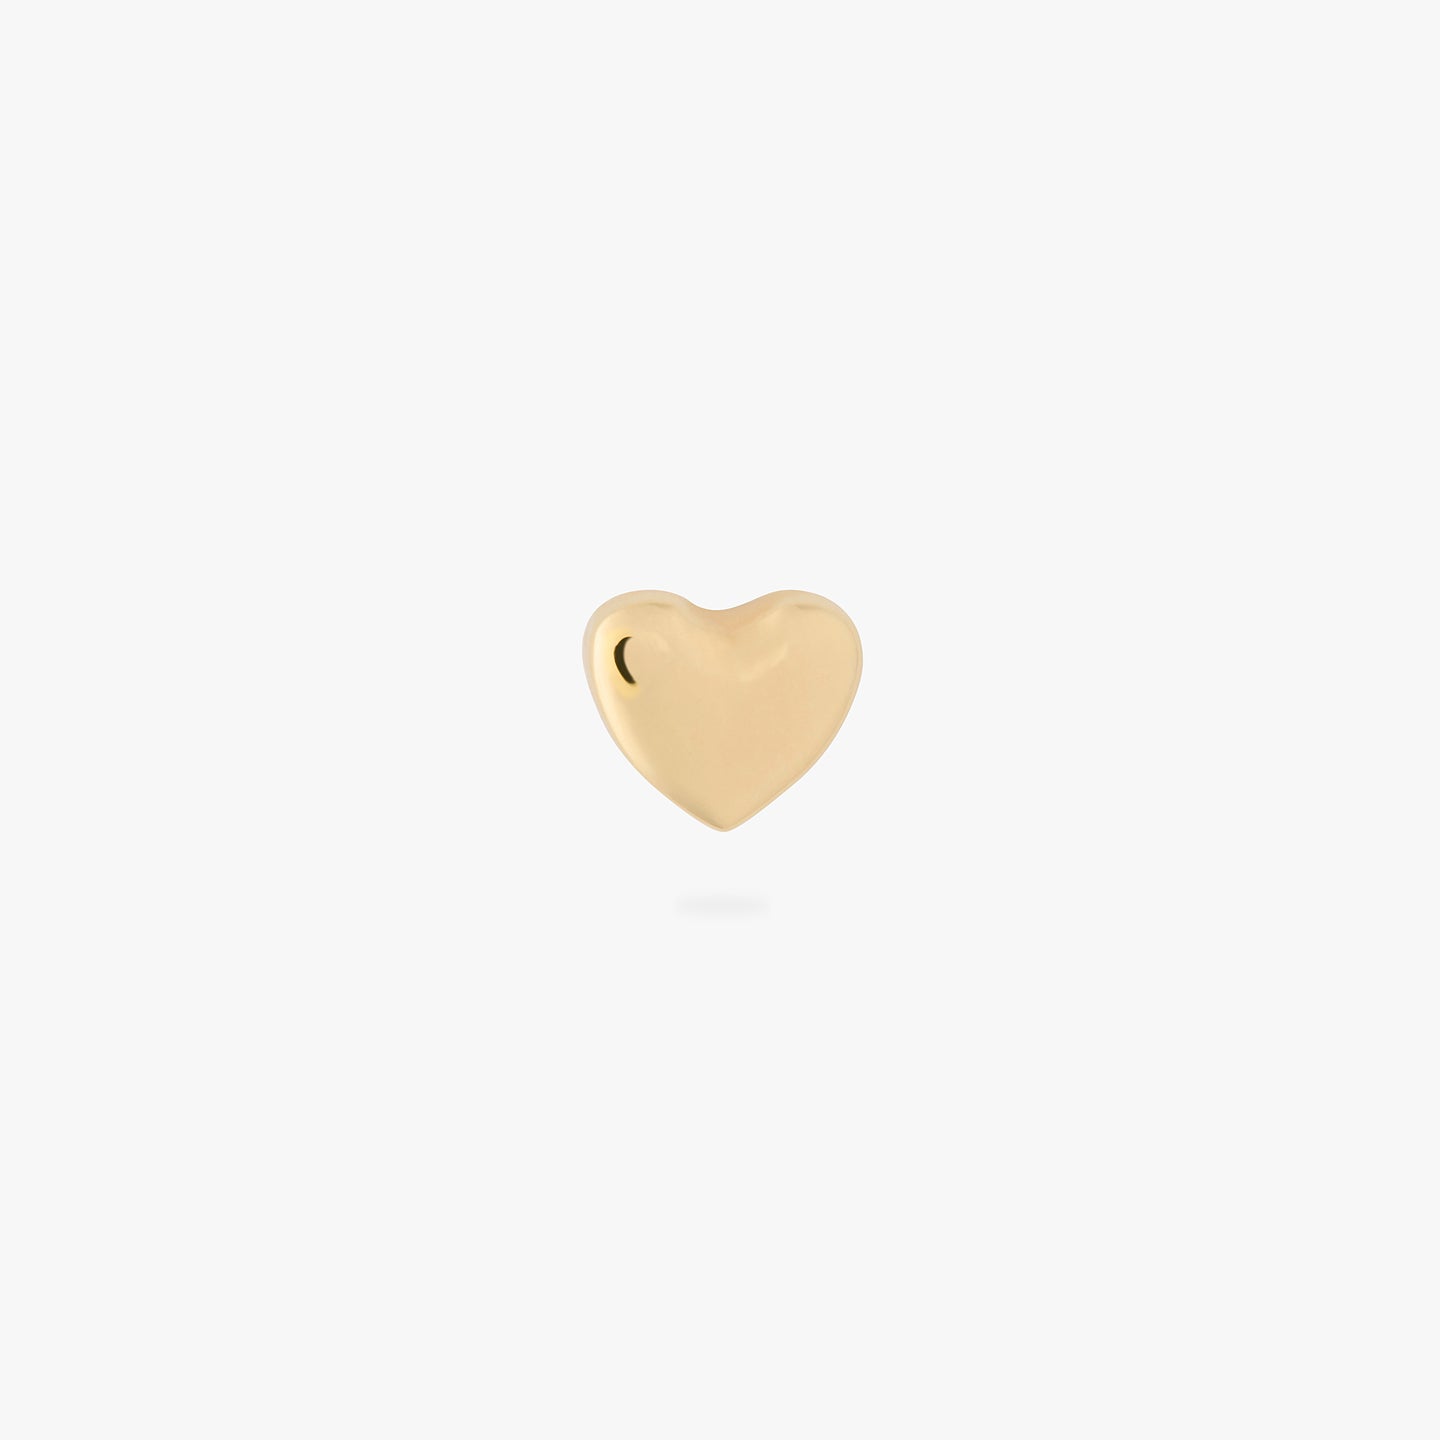 An image of a gold heart shaped flatback post that is 8mm in length. color:null|8mm length